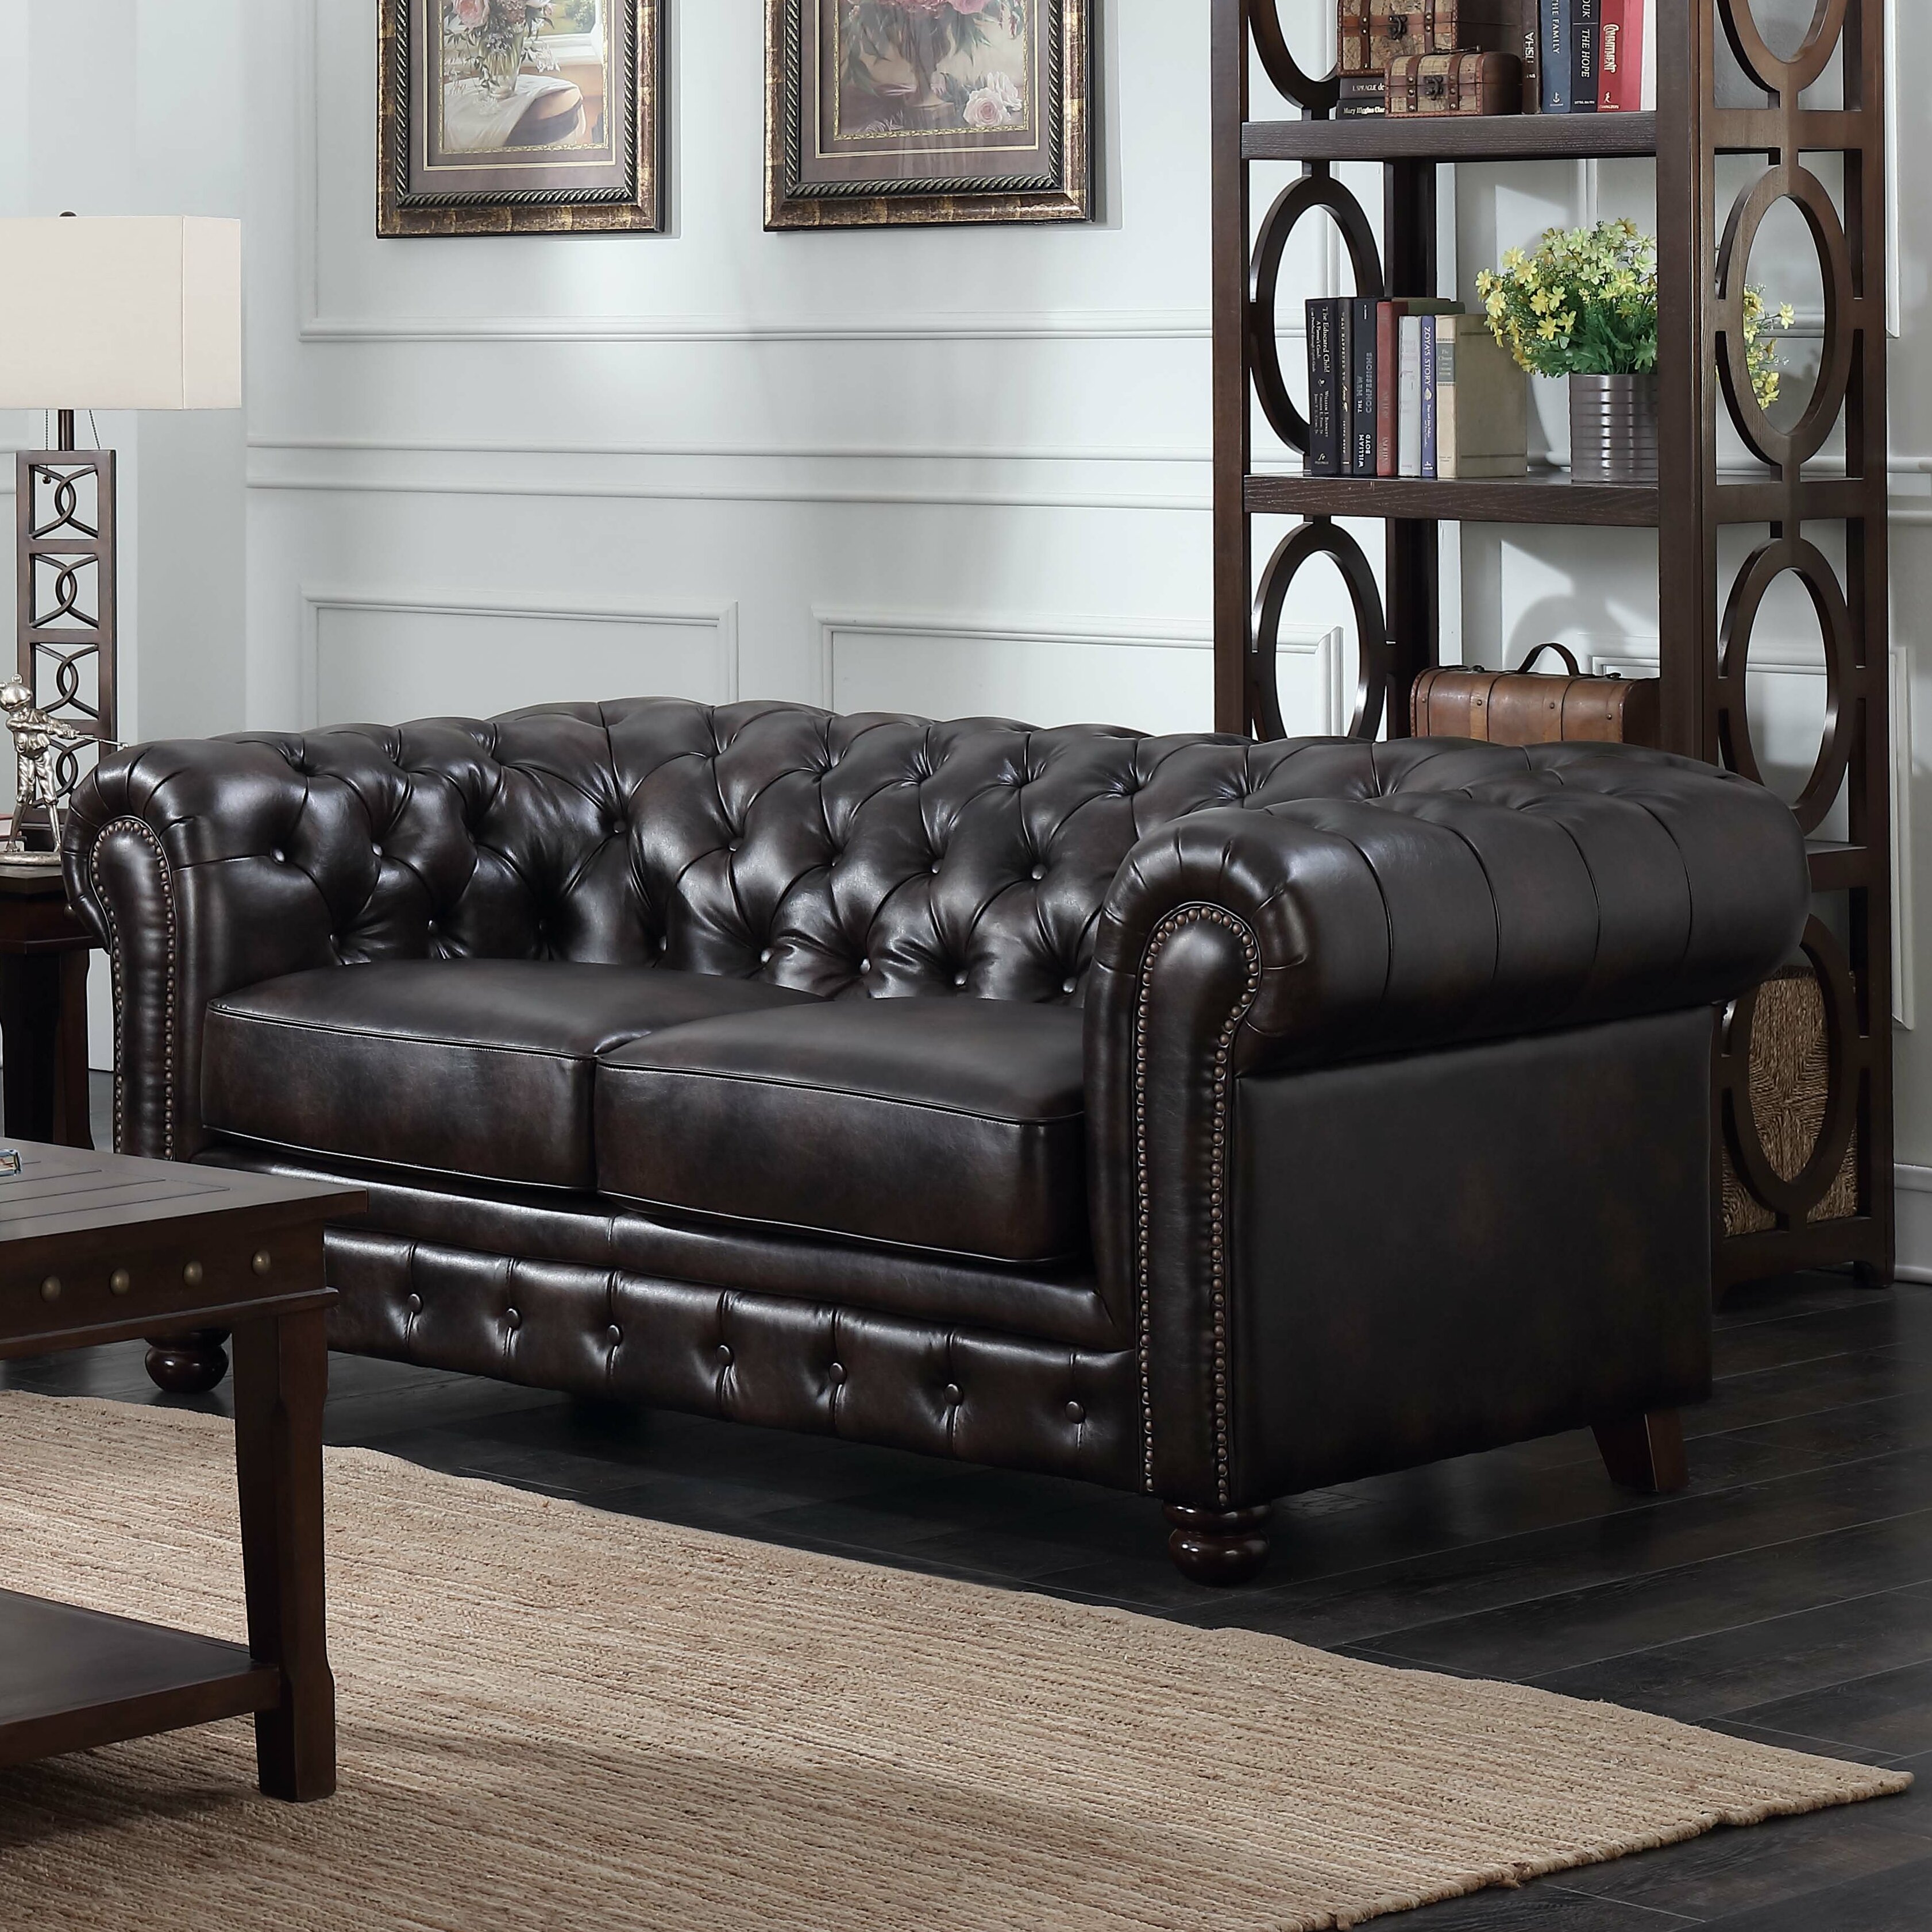 Moroney 72” Faux Leather Rolled Arm Chesterfield Sofa